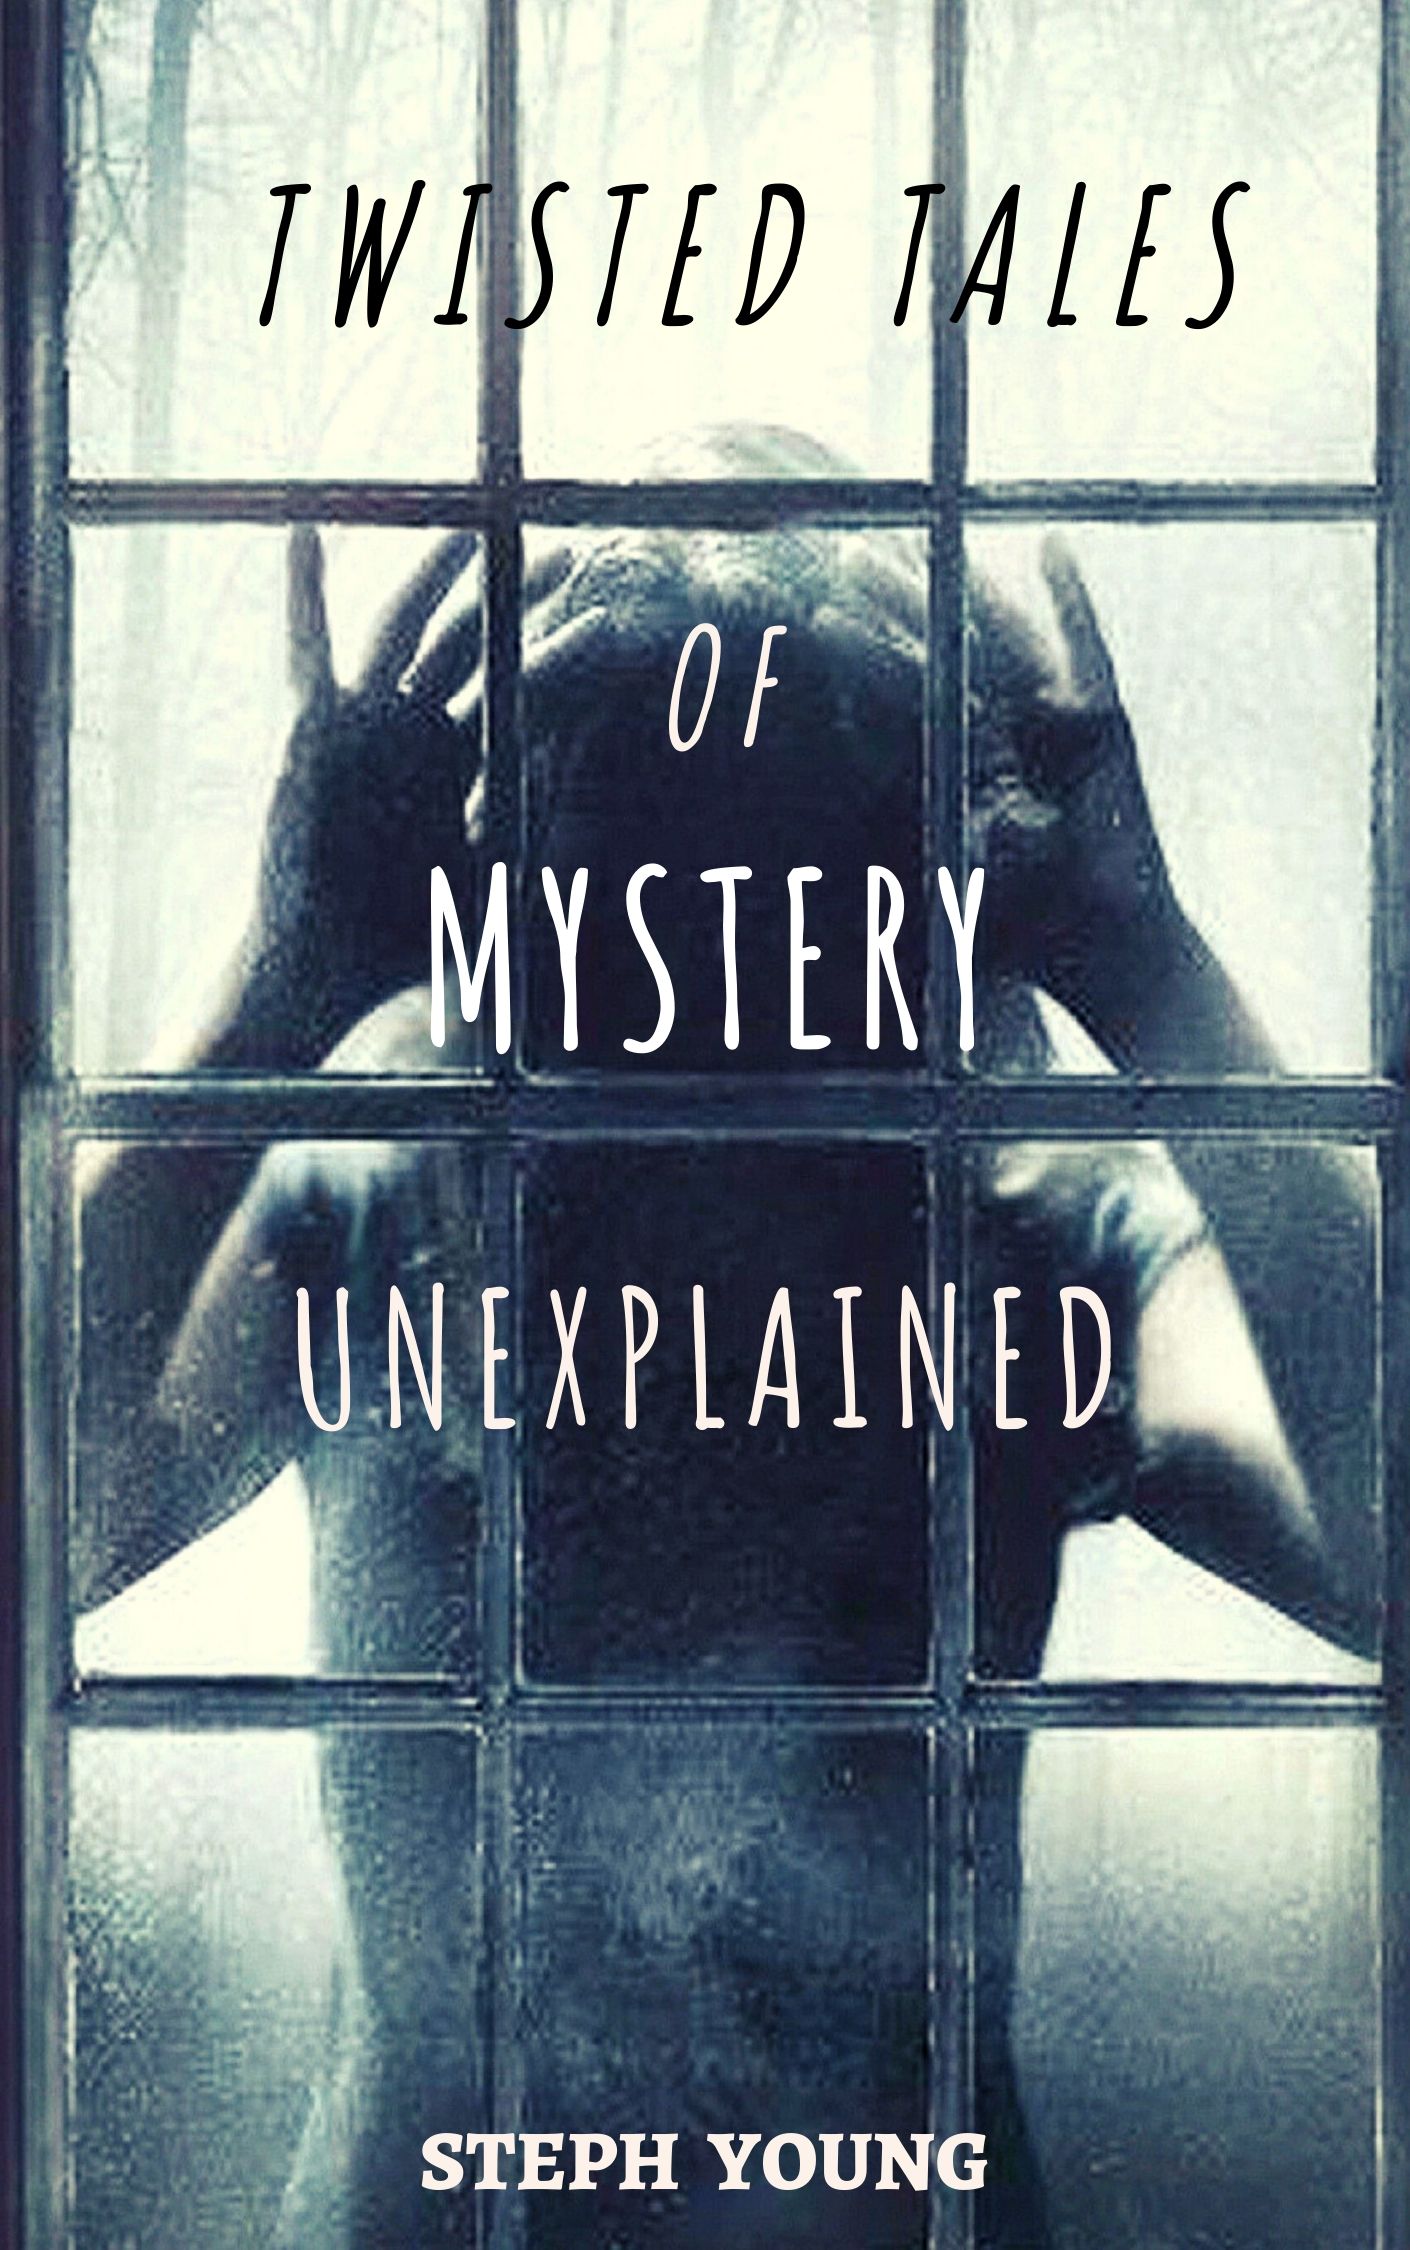 FREE: Twisted Tales of Mystery Unexplained by Steph Young